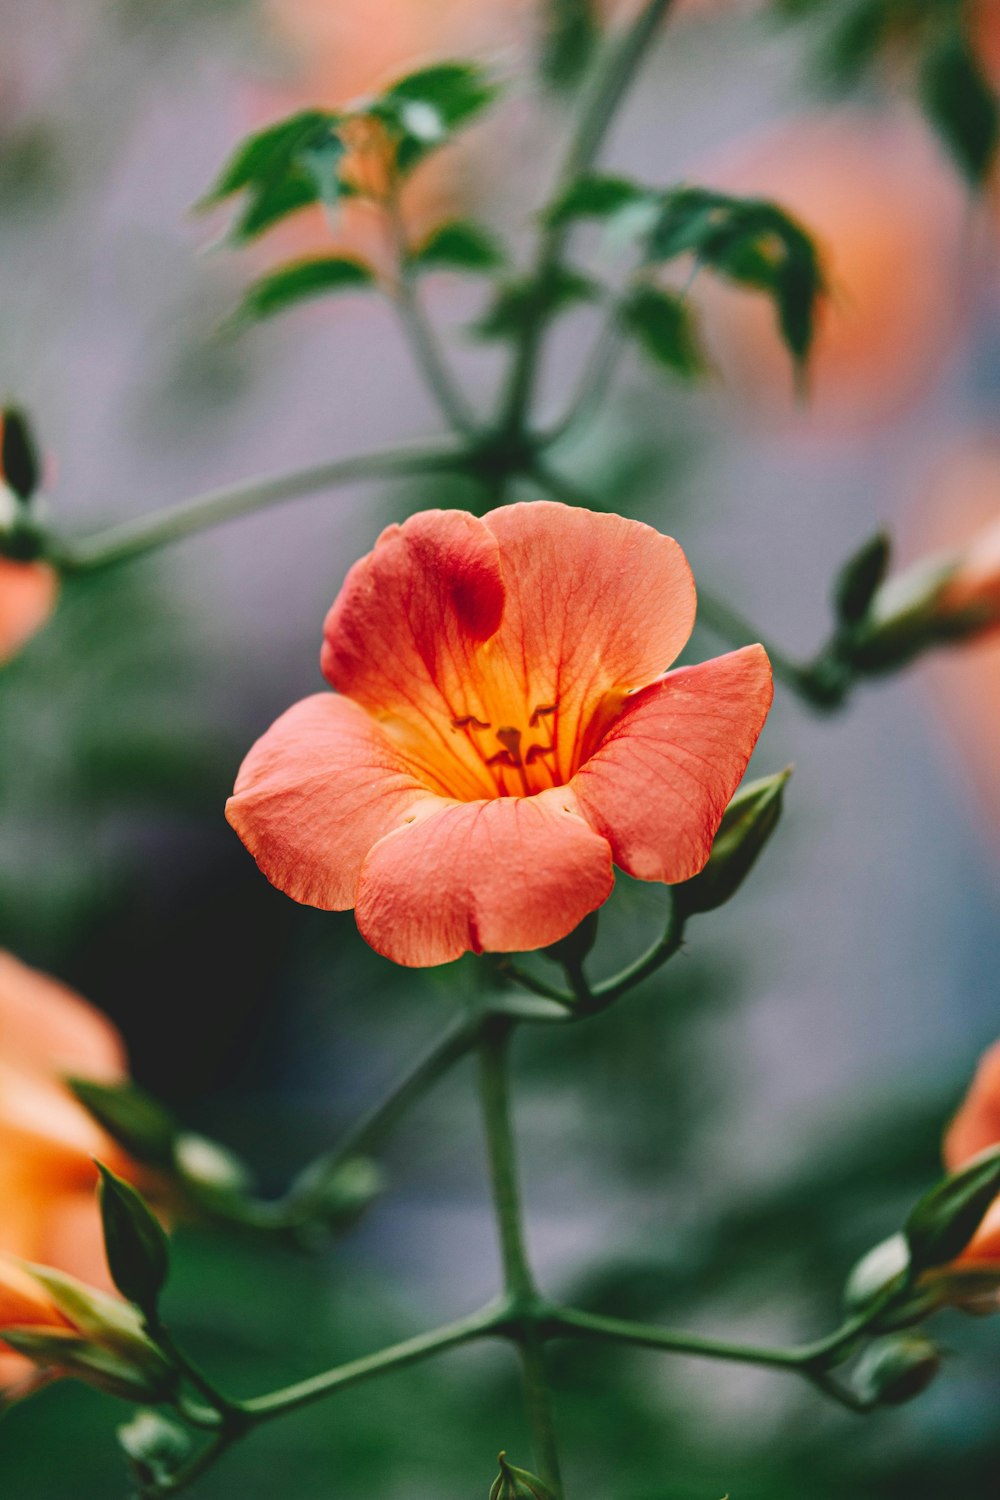 shallow focus photography of green-leafed plant with orange flower